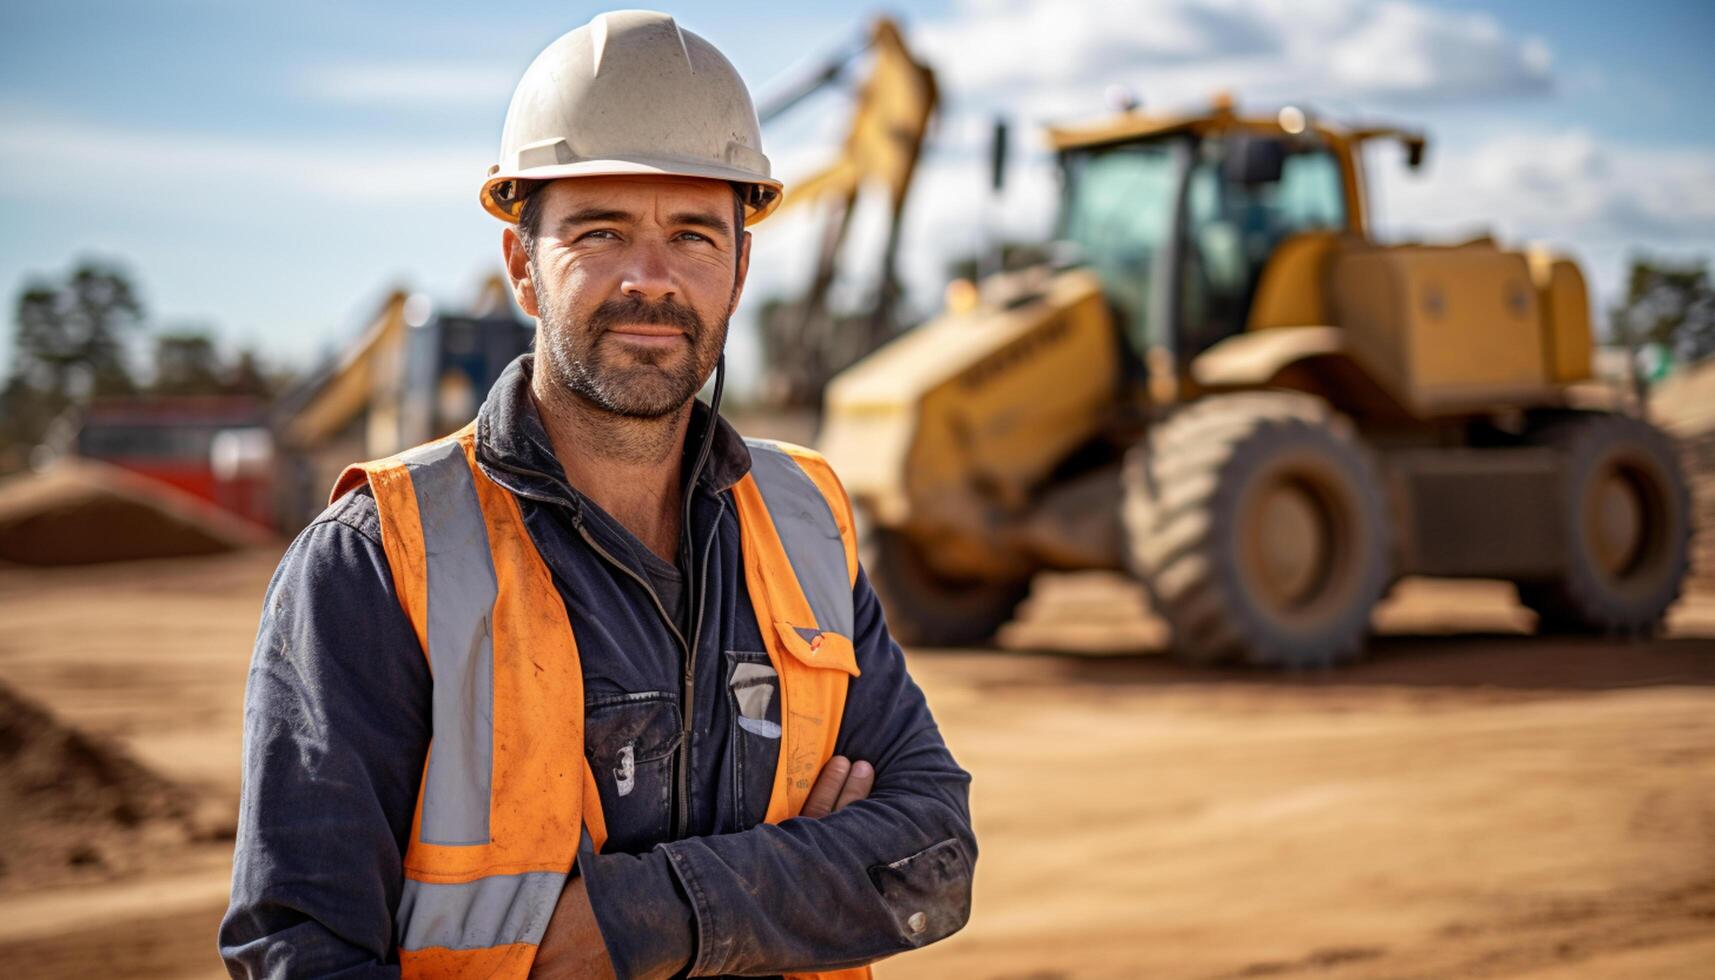 AI generated Portrait of construction worker on building site near to backhoe looking at camera smiling photo